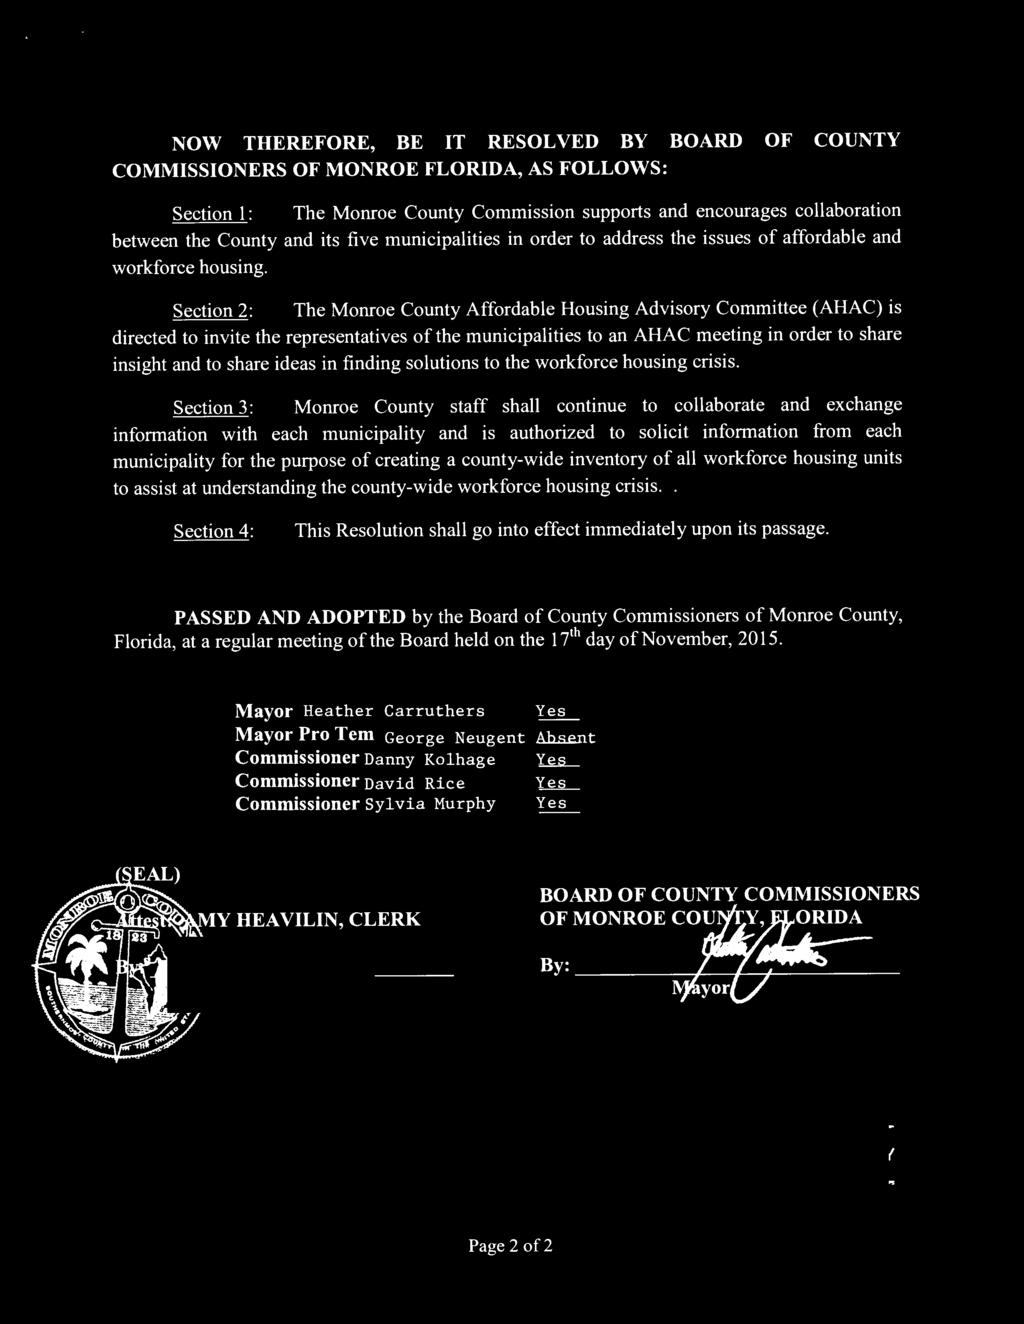 :. ". ; NOW THEREFORE, BE IT RESOLVED BY BOARD OF COUNTY COMMISSIONERS OF MONROE FLORIDA, AS FOLLOWS: Section 1: The Monroe County Commission supports and encourages collaboration between the County